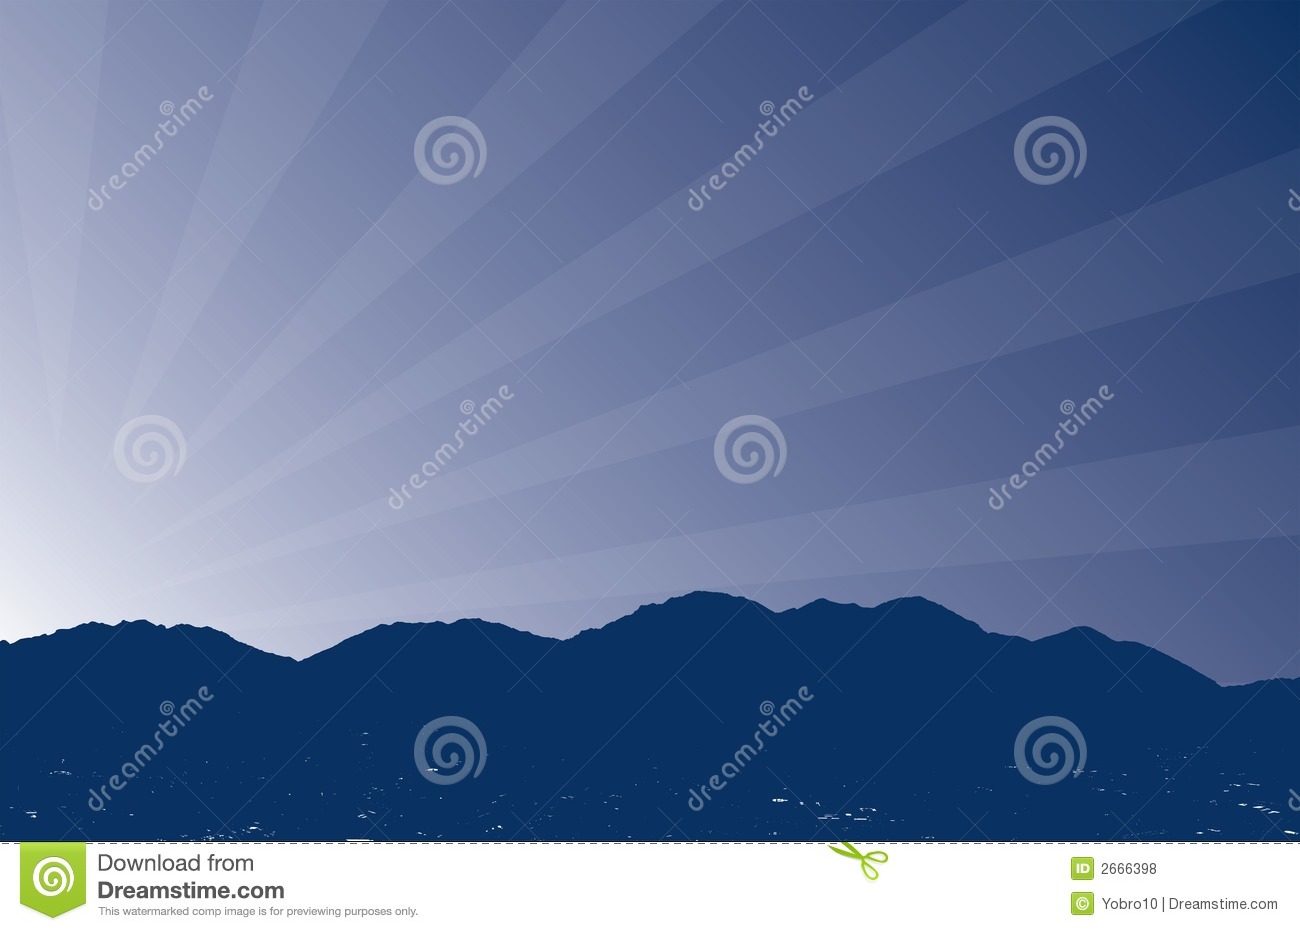 Vector Illustration Of Mountains With Sun Rising In The Background